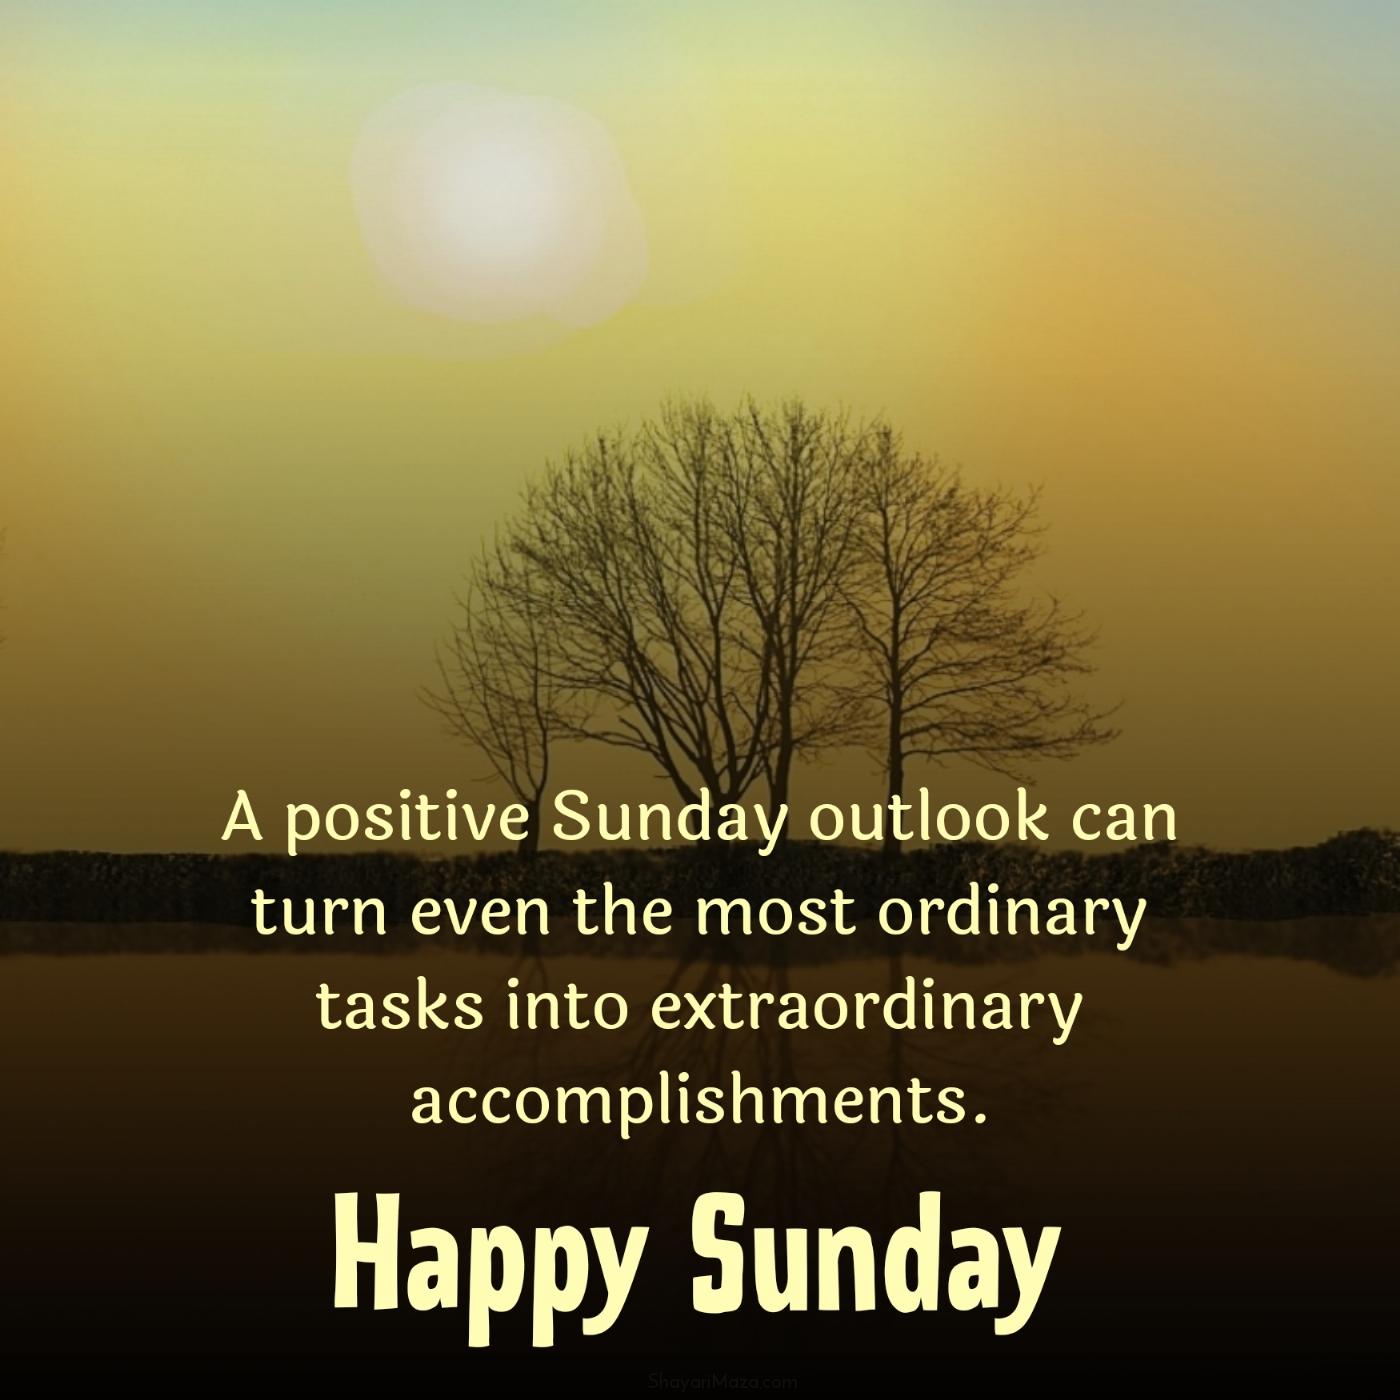 A positive Sunday outlook can turn even the most ordinary tasks